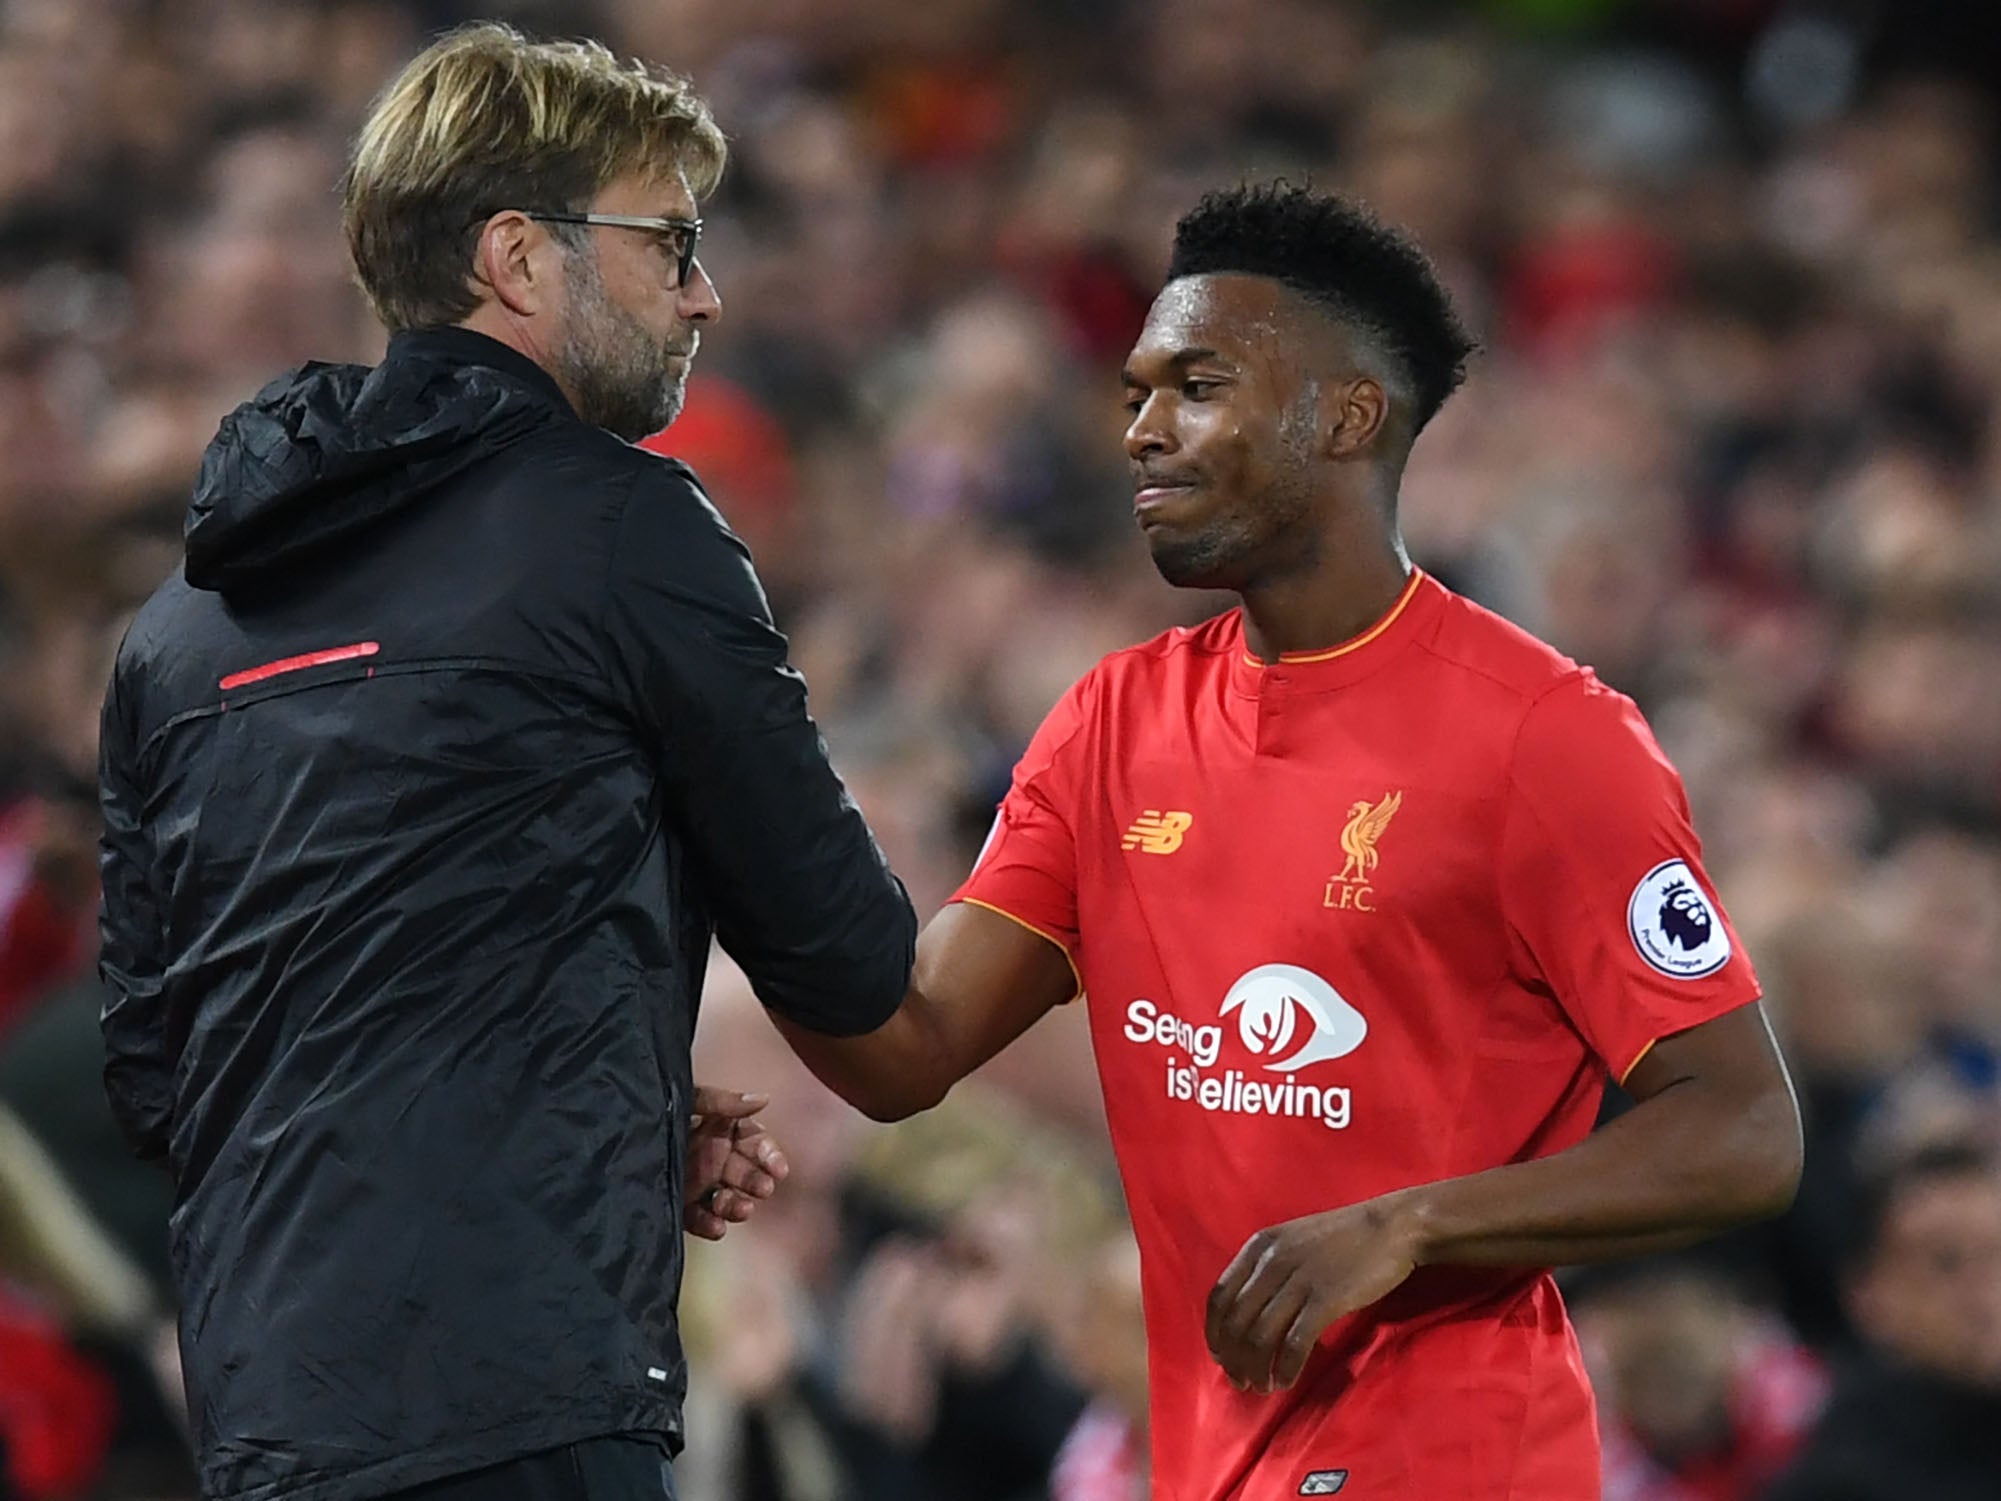 Sturridge has played mainly as a substitute this season